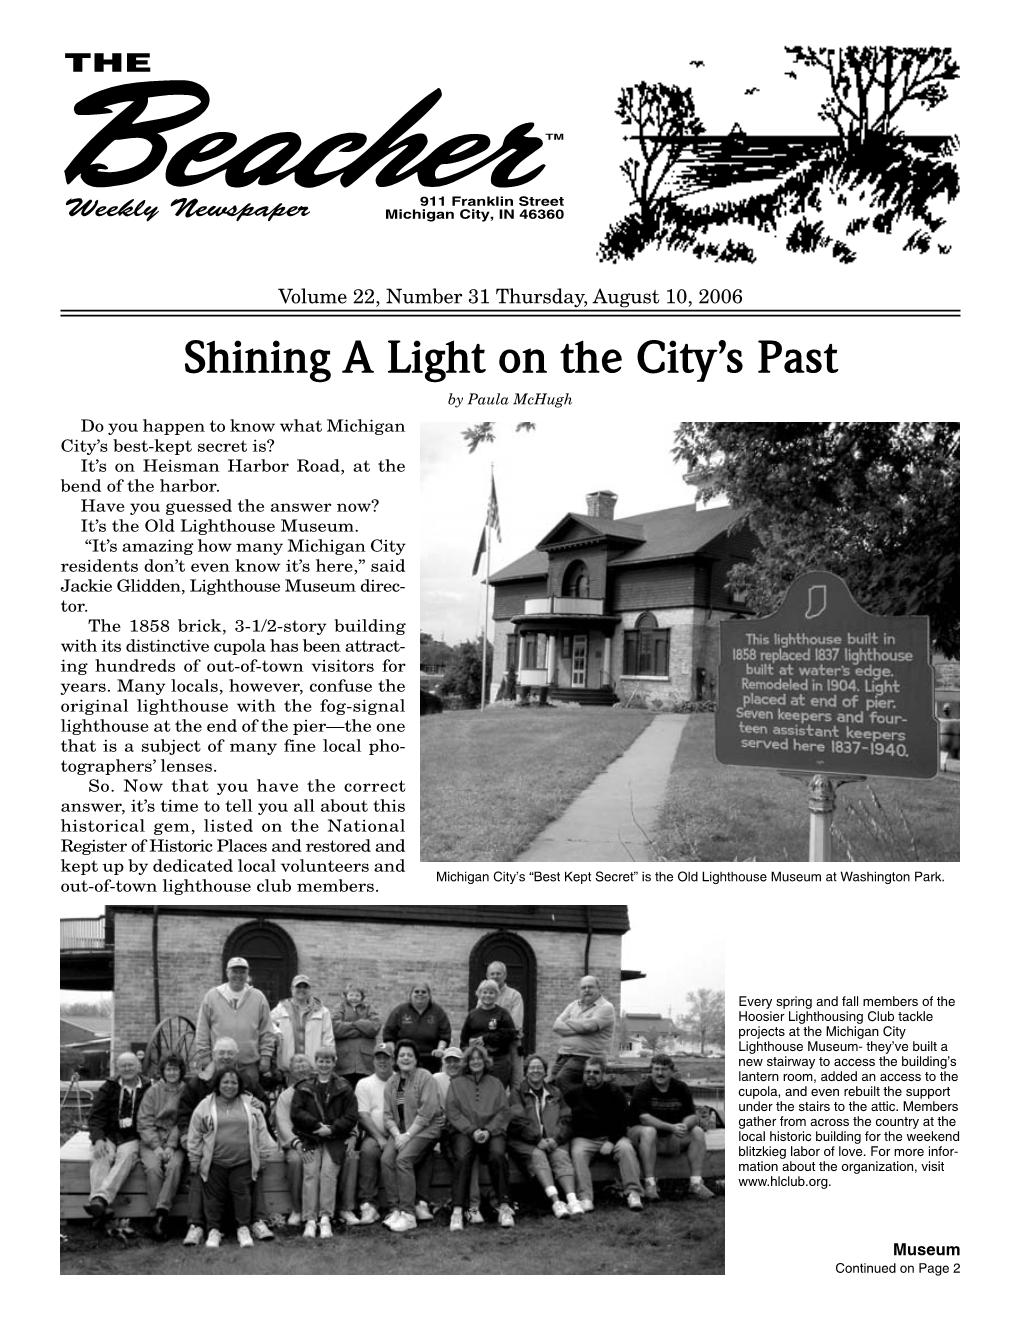 Shining a Light on the City's Past